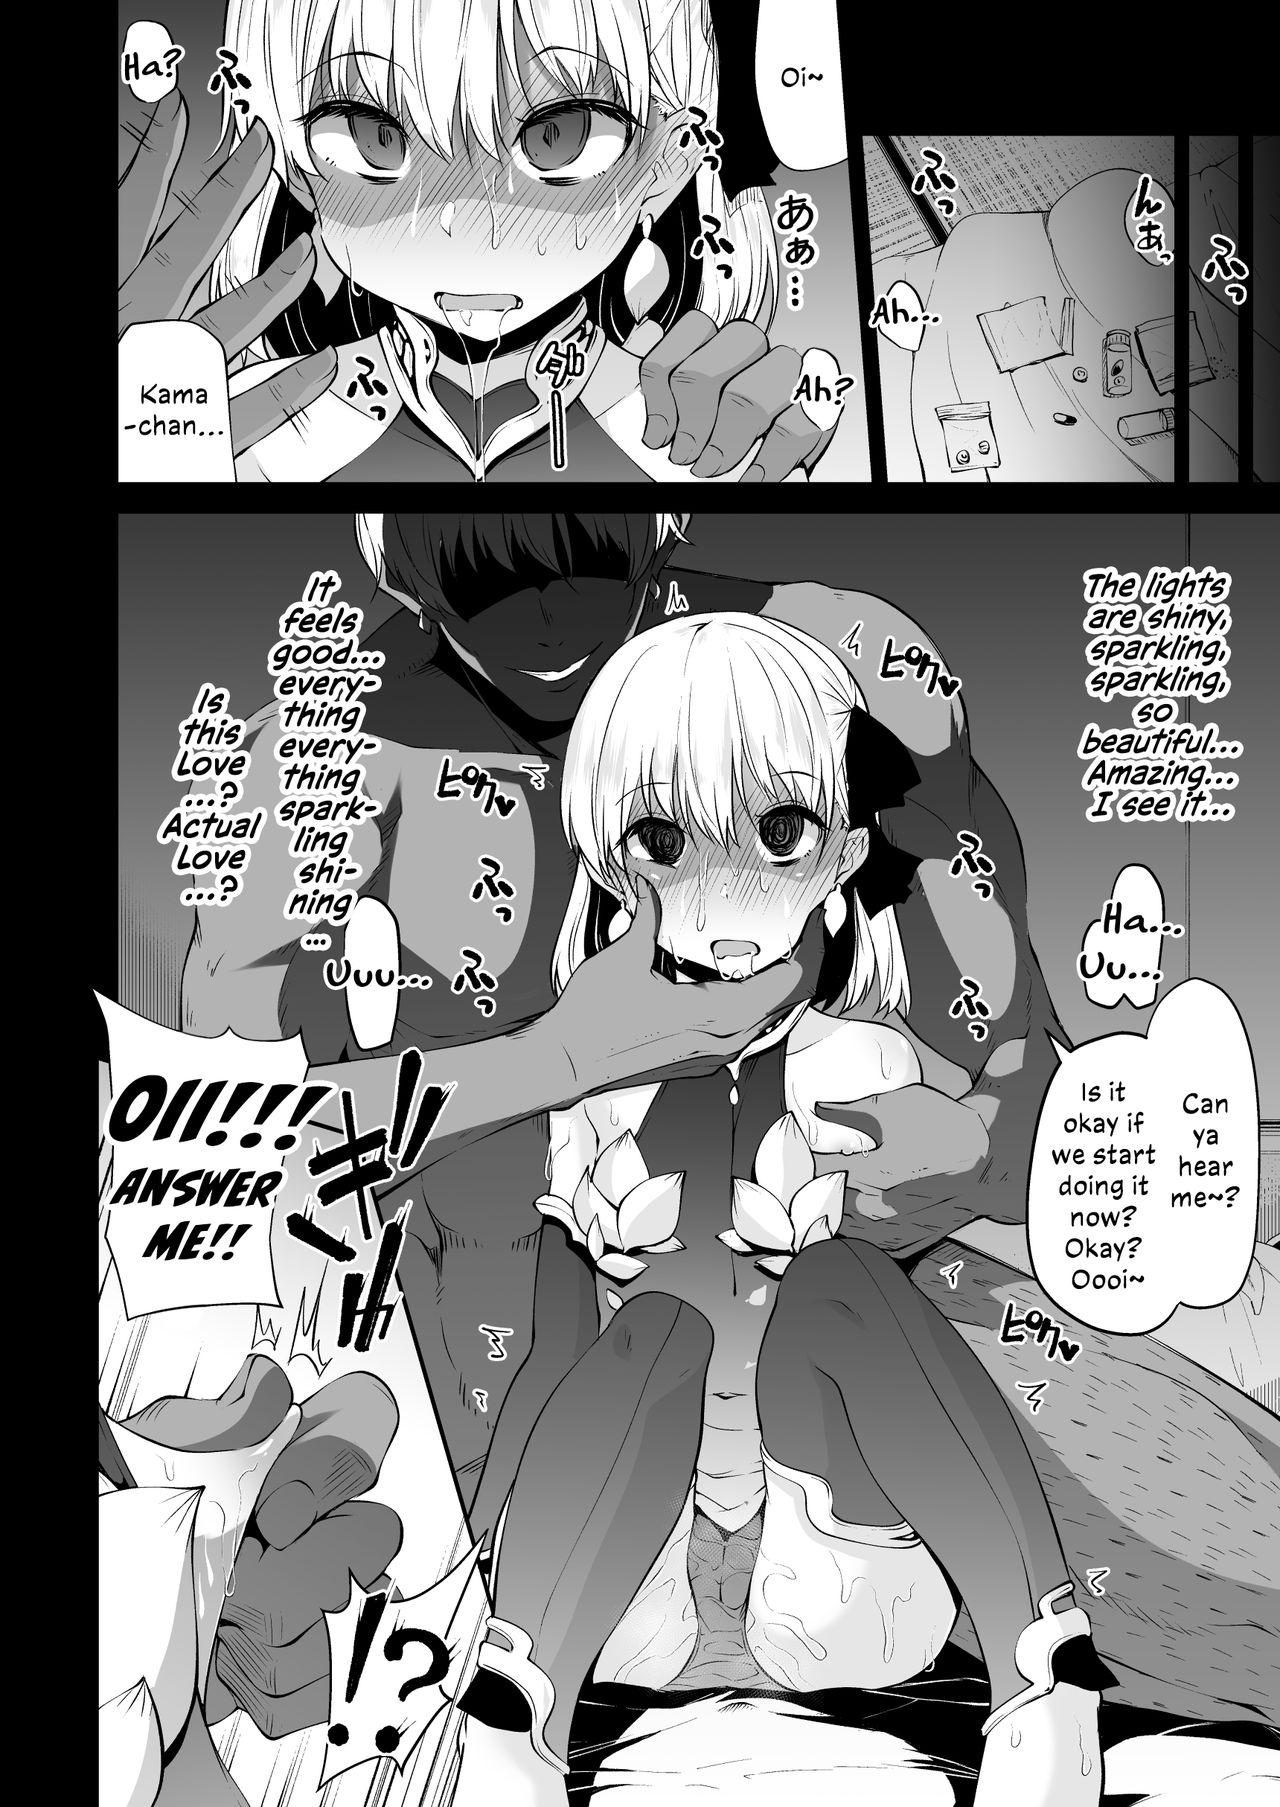 Vibrator [Kitsuneya (Leafy)] Kama-chan to Love-prescription | Kama-chan's Prescription of Love (Fate/Grand Order) [English] [Melty Scans] [Digital] - Fate grand order Married - Page 12